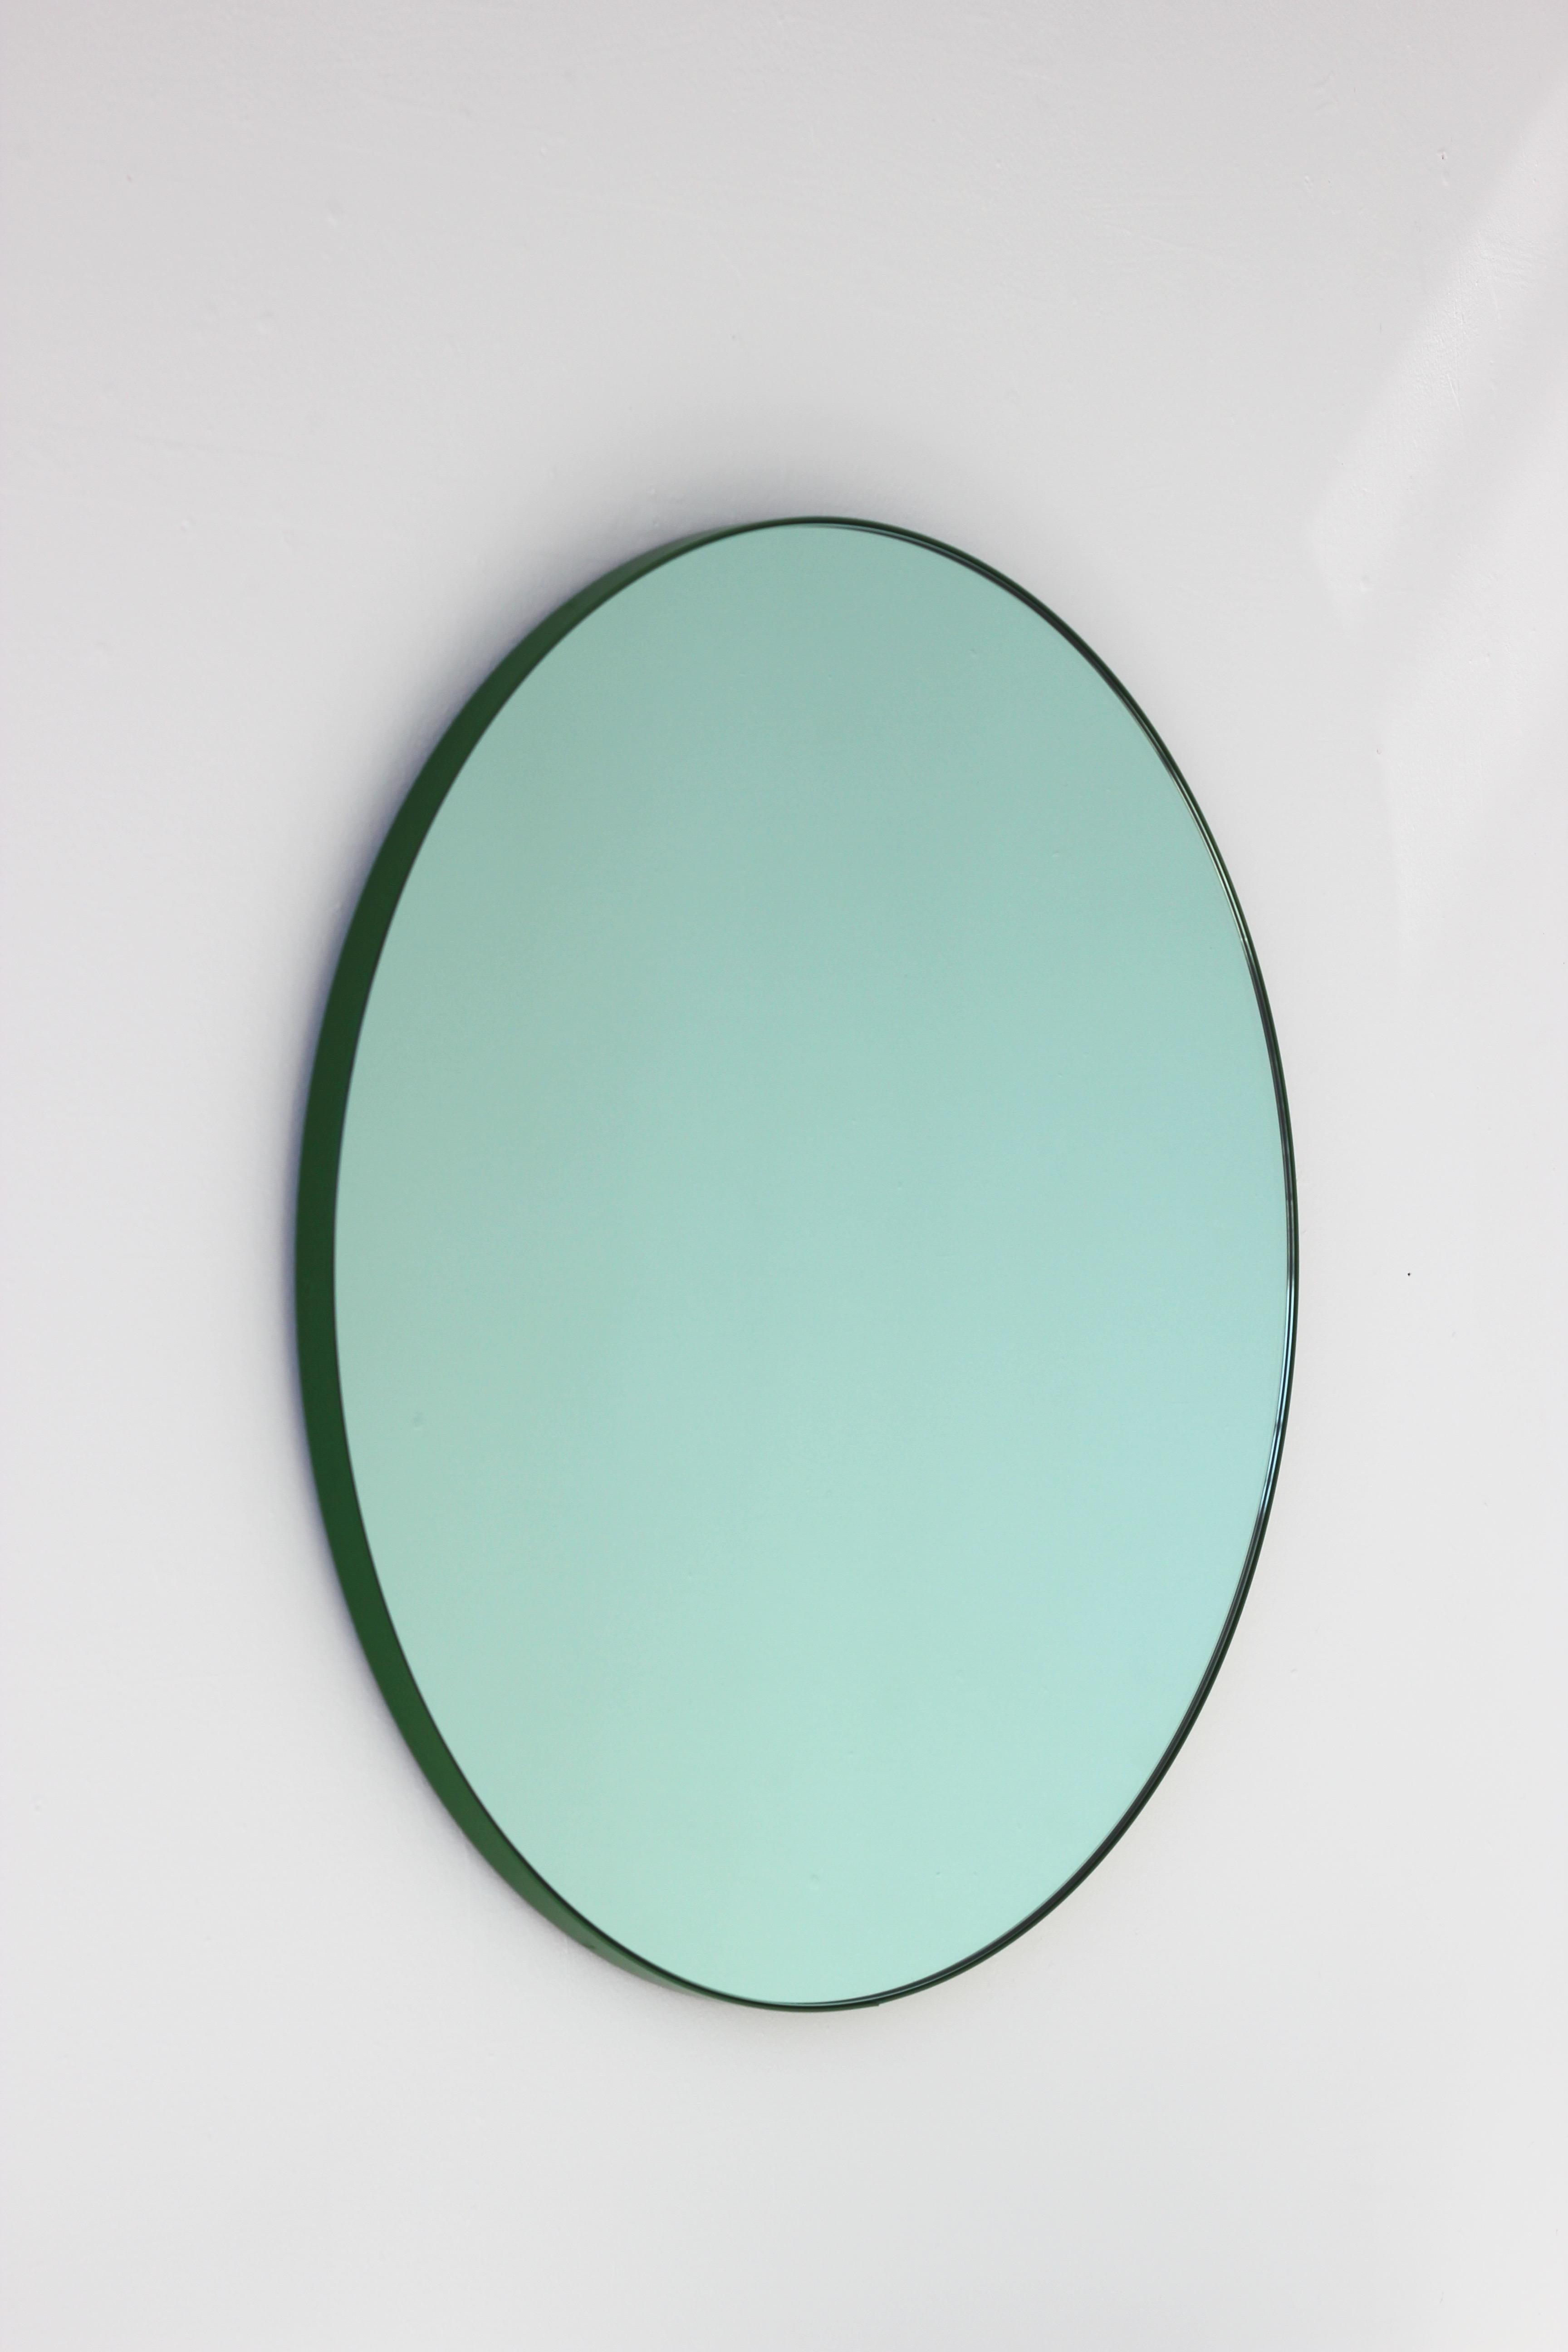 Contemporary Orbis Green Tinted Modern Round Mirror with Green Frame, Small